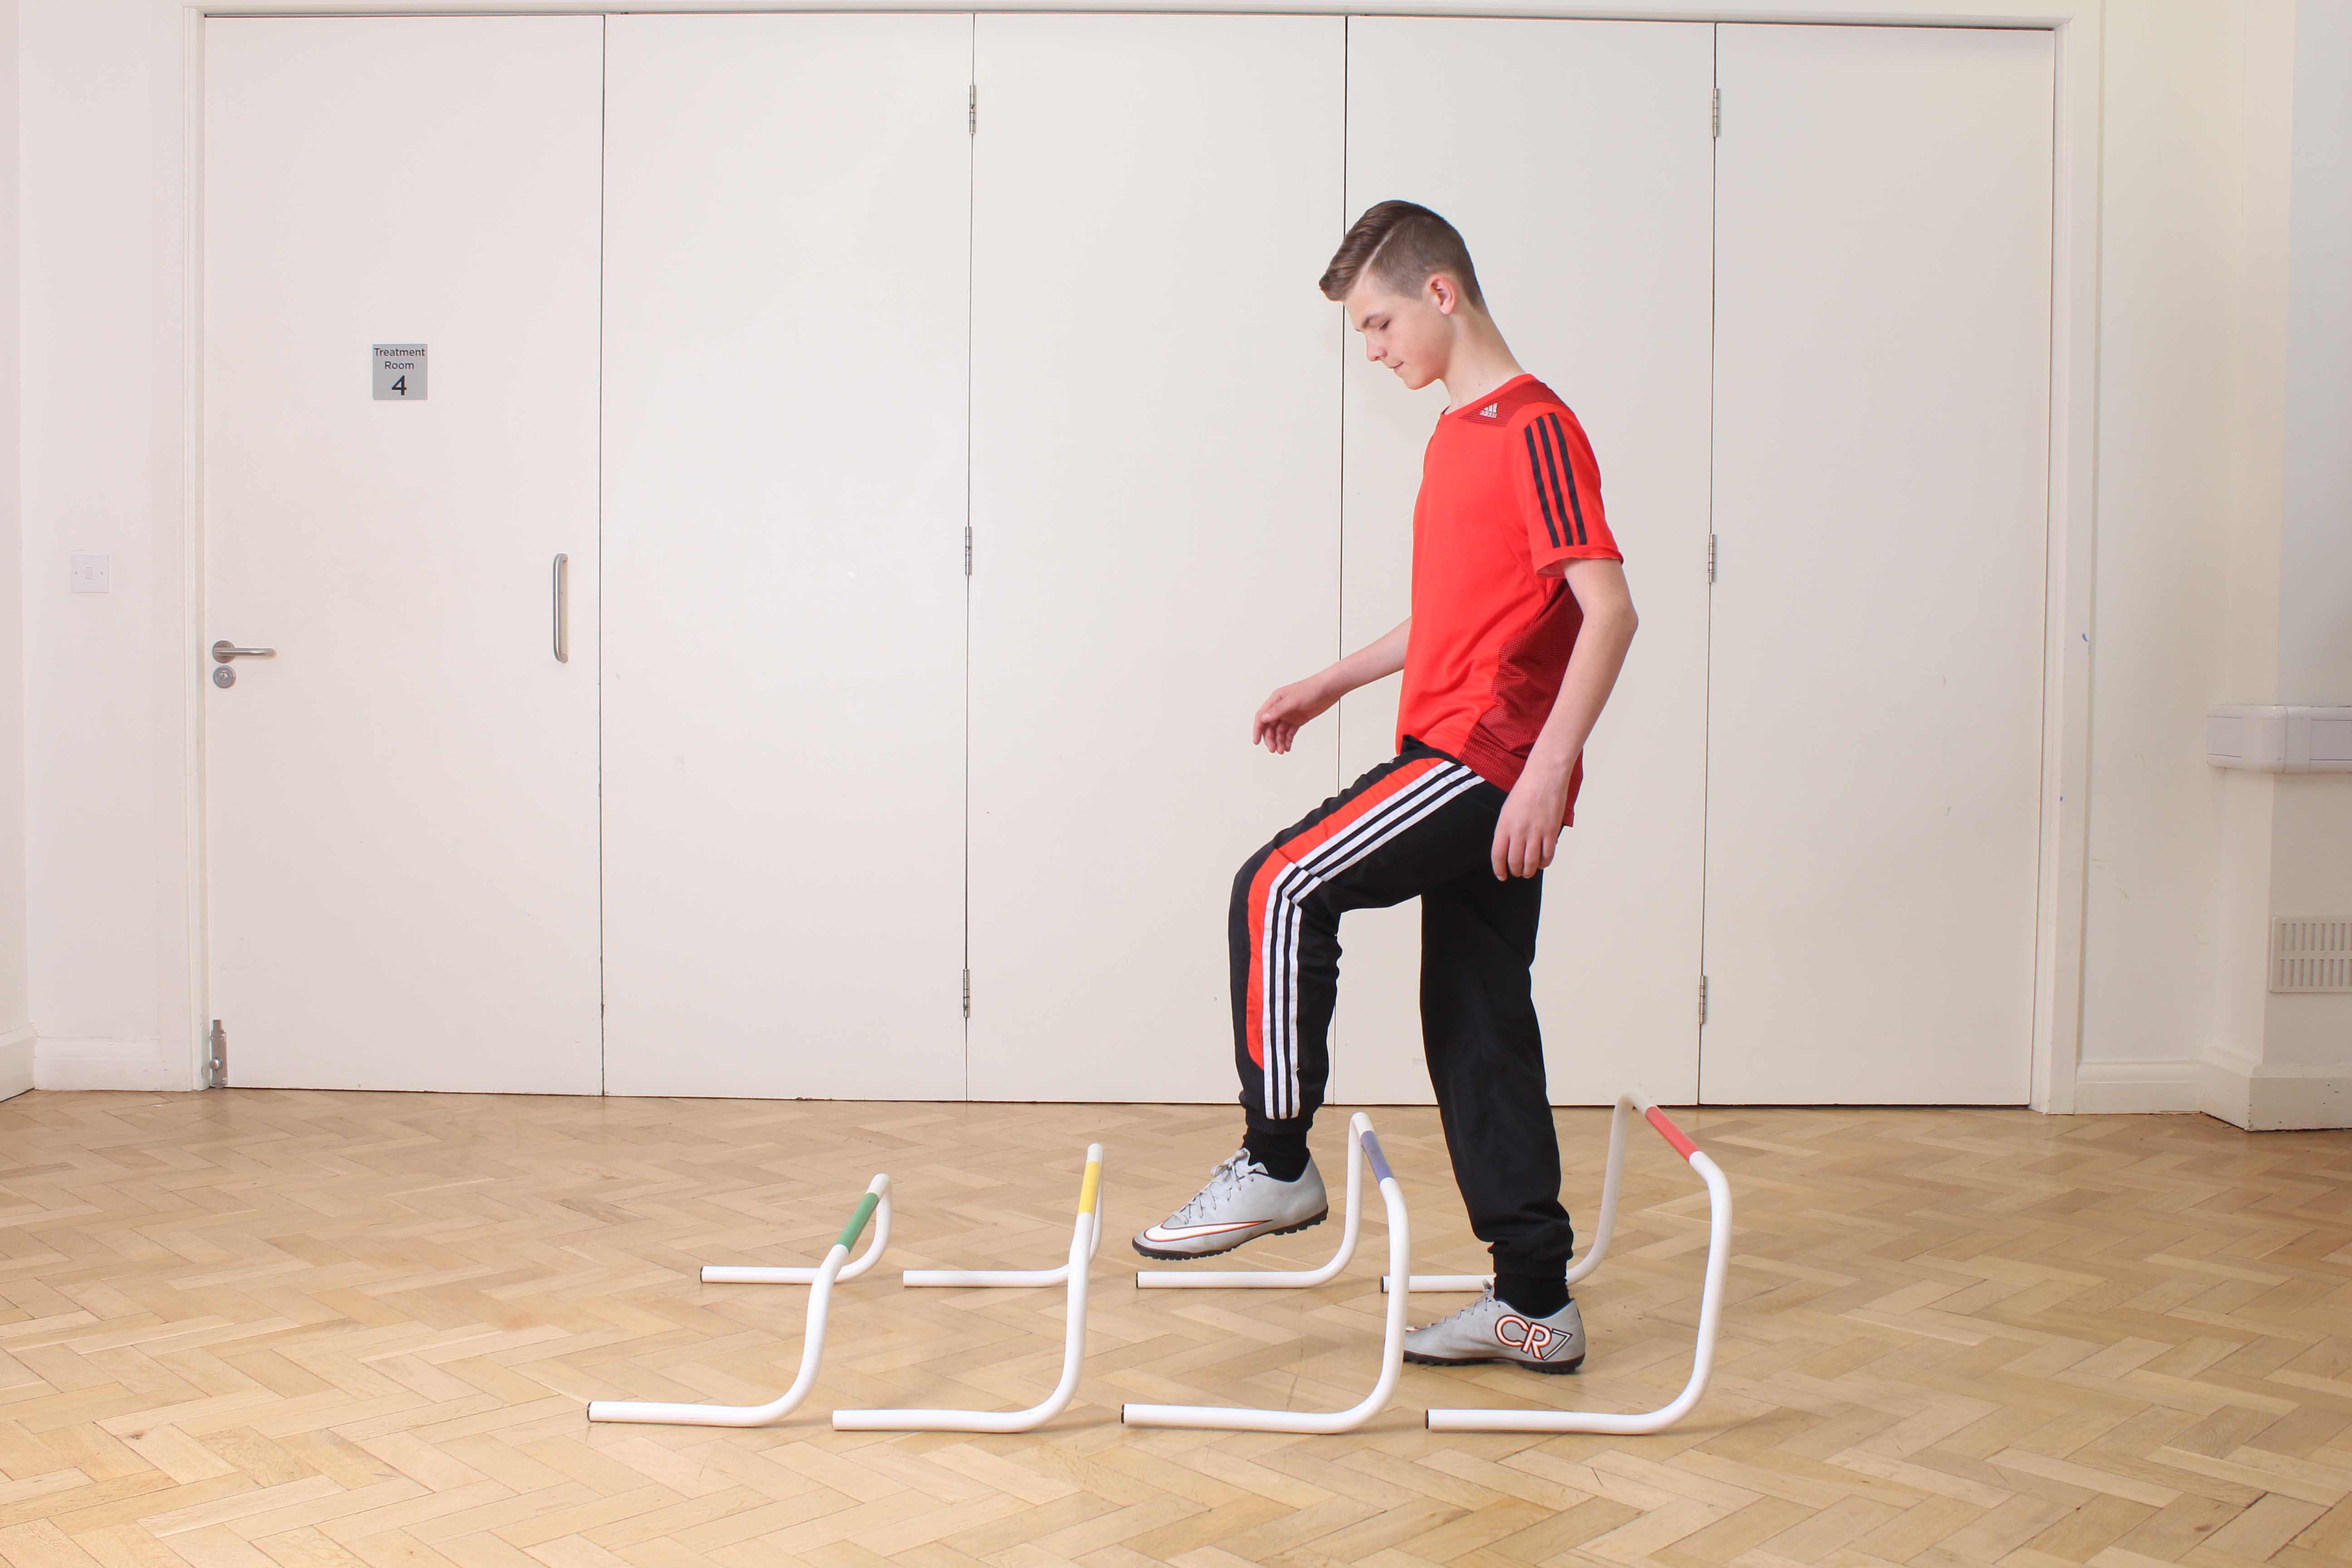 Gross motor function exercises designed to improve co-ordinated movement